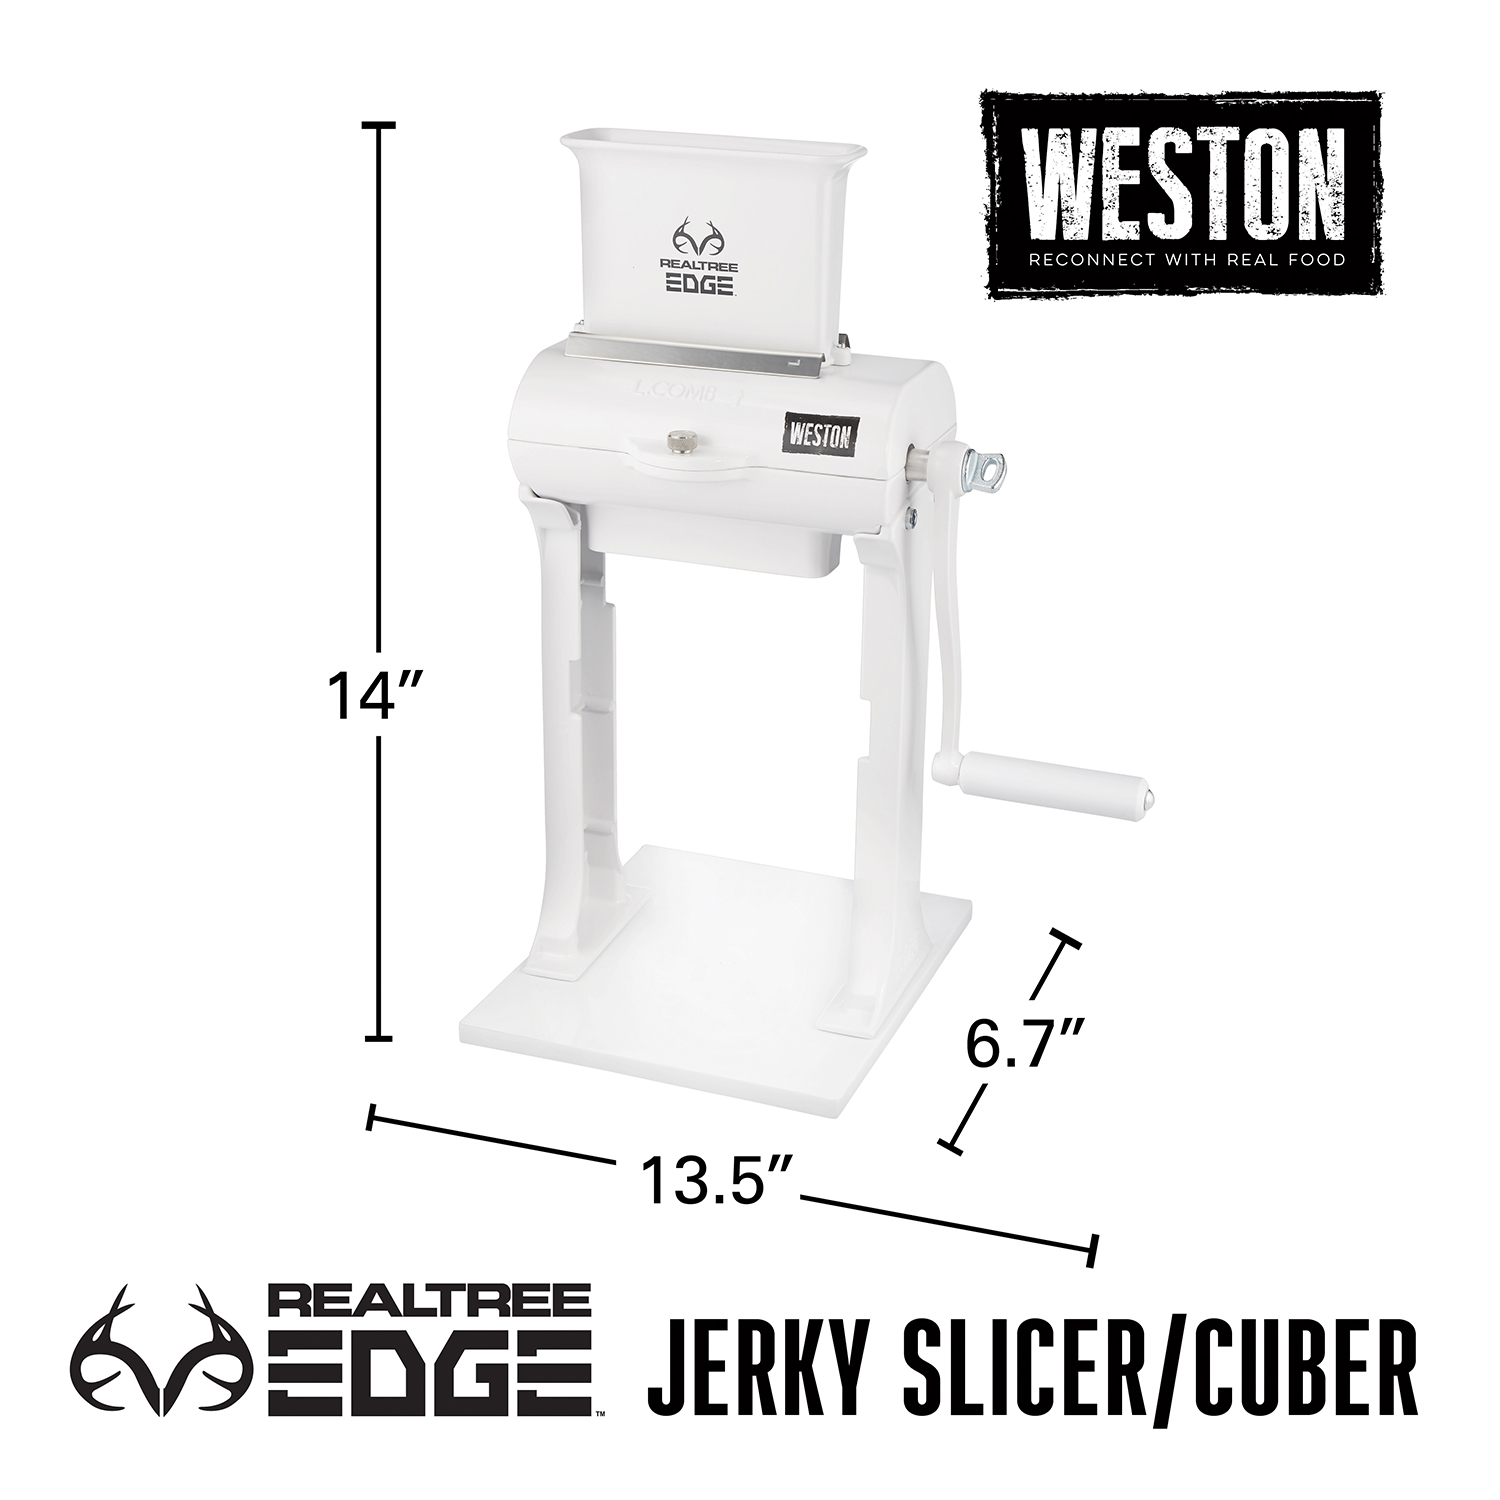 Weston Realtree 2 in 1 Jerky Slicer and Cuber/Tenderizer